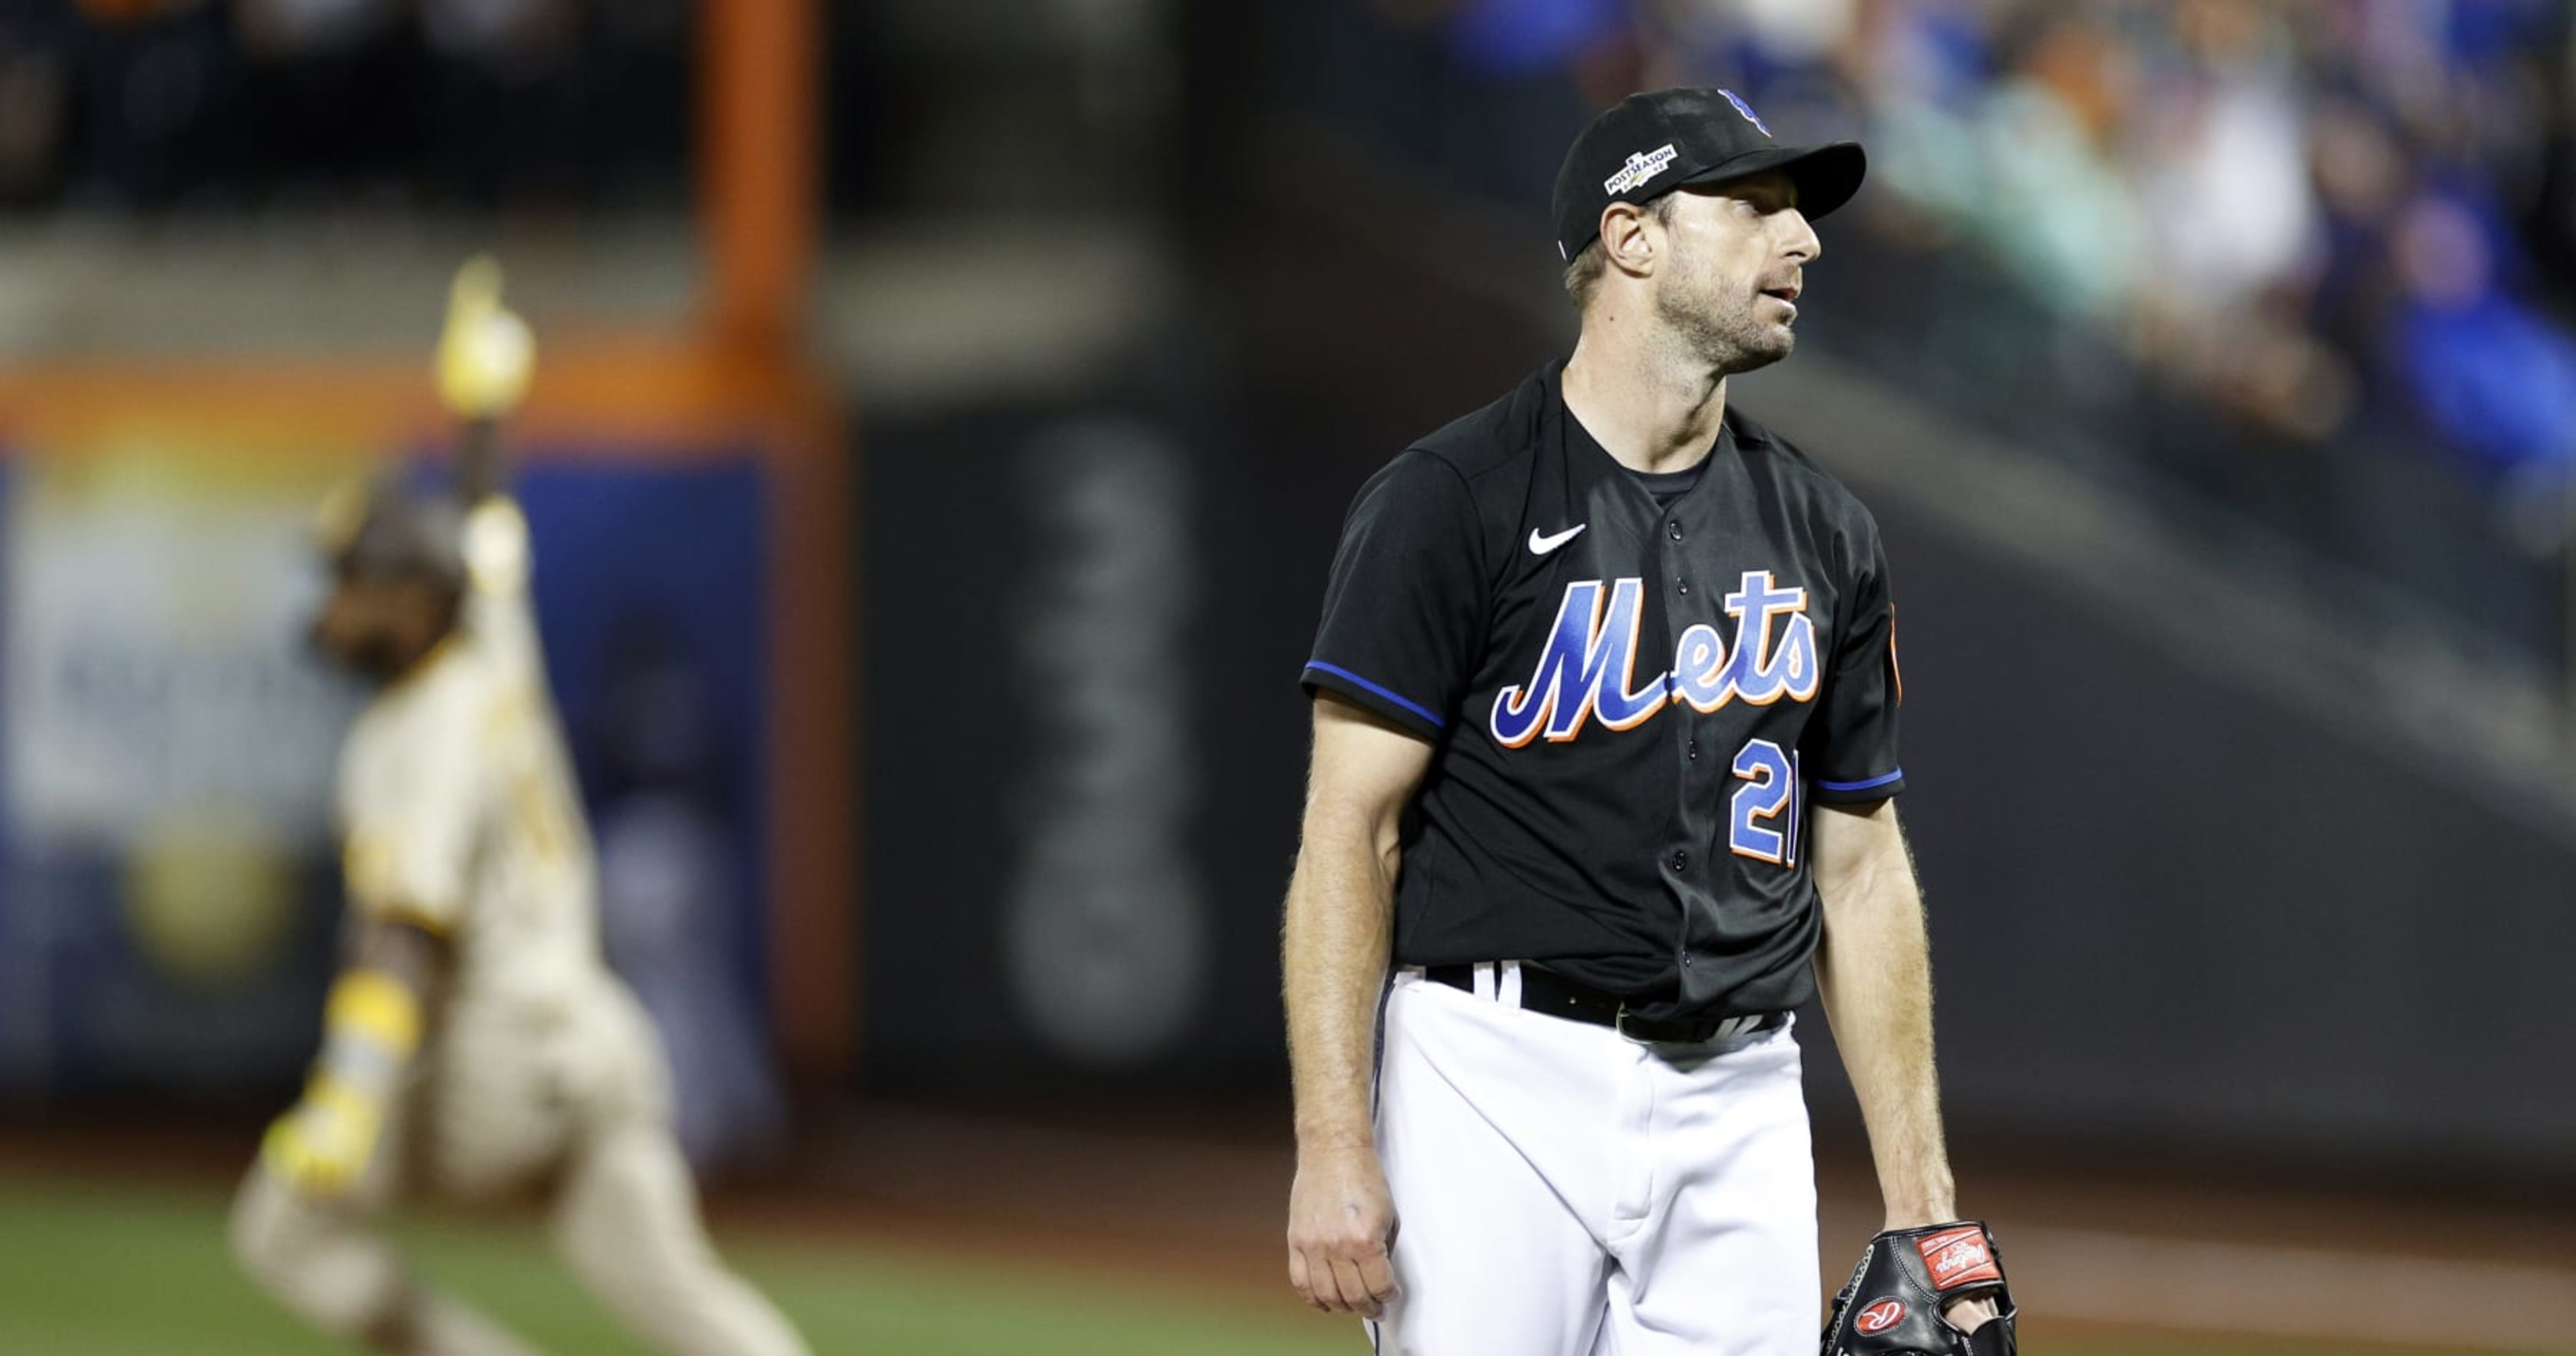 Mets' Max Scherzer: Game 1 Loss to Padres 'One of the Lowest of Lows' thumbnail